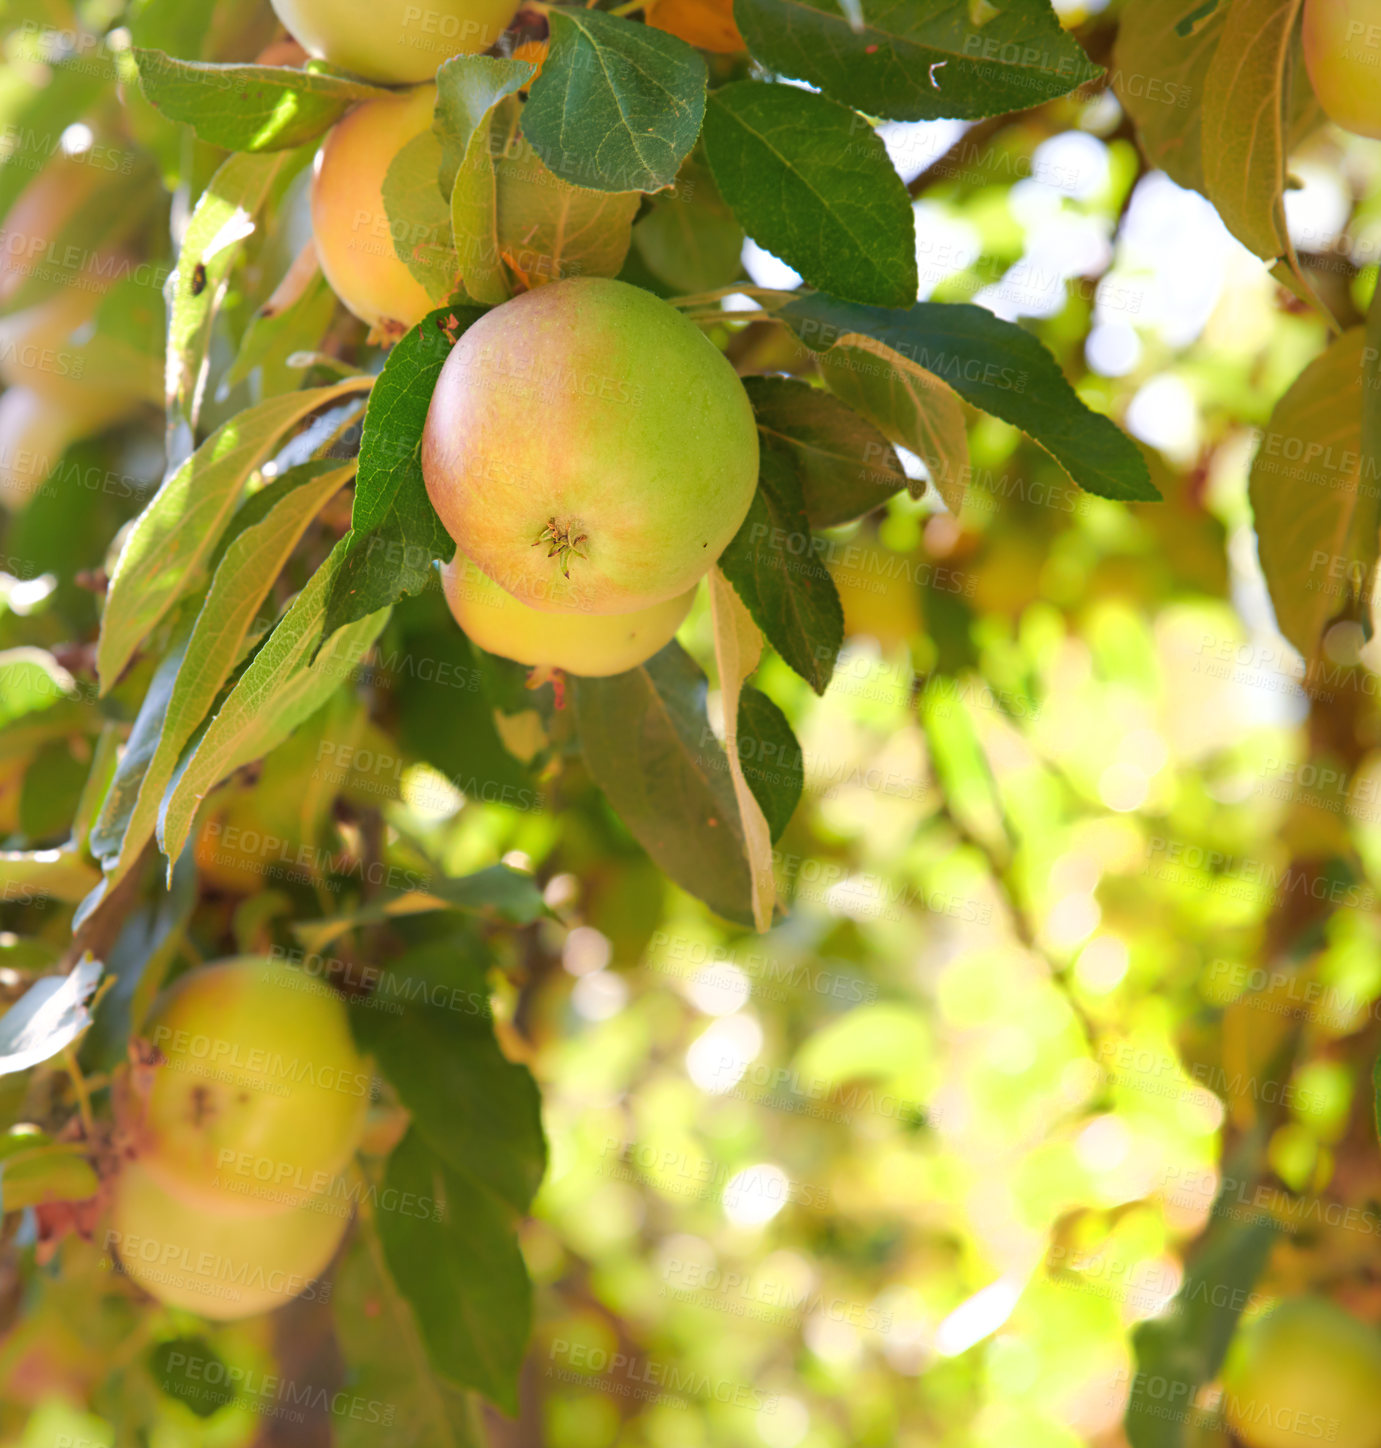 Buy stock photo Closeup of green apples growing on an apple tree branch in summer with copyspace. Fruit hanging from an orchard farm tree with bokeh and copy space. Sustainable organic agriculture in the countryside